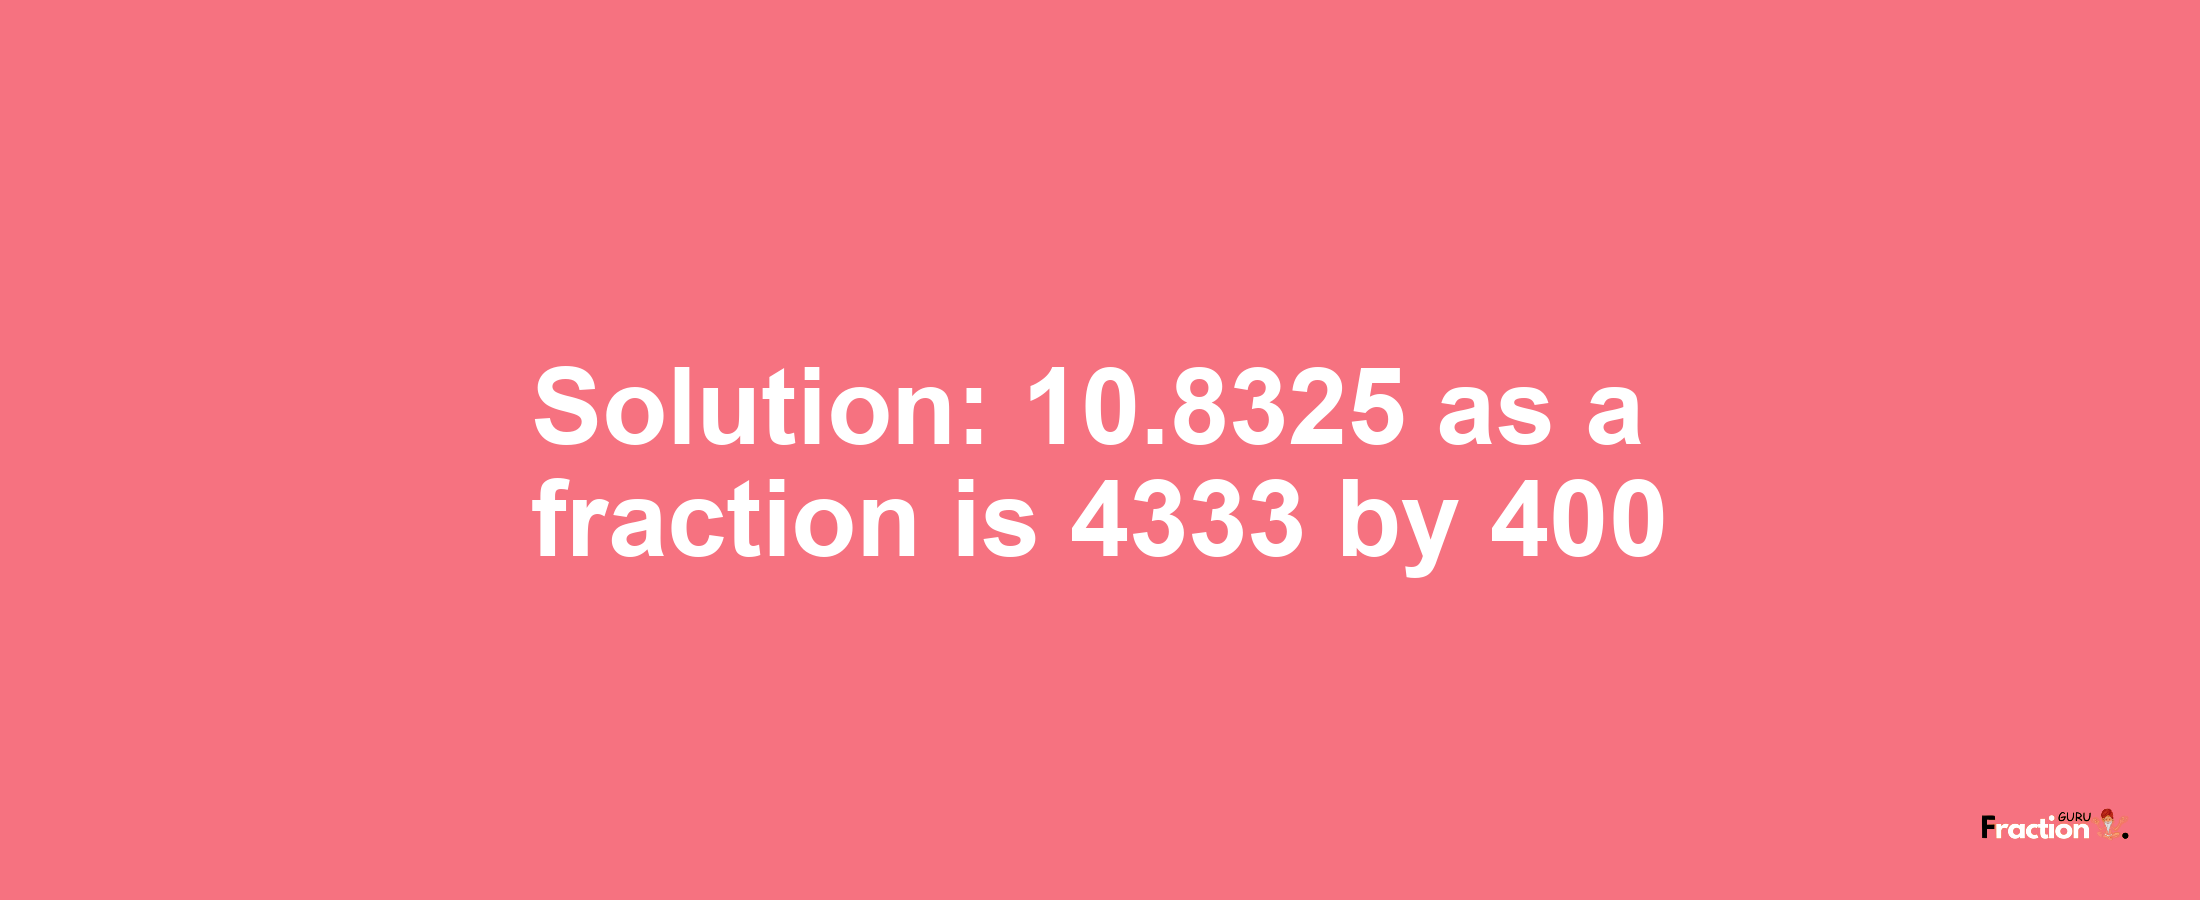 Solution:10.8325 as a fraction is 4333/400